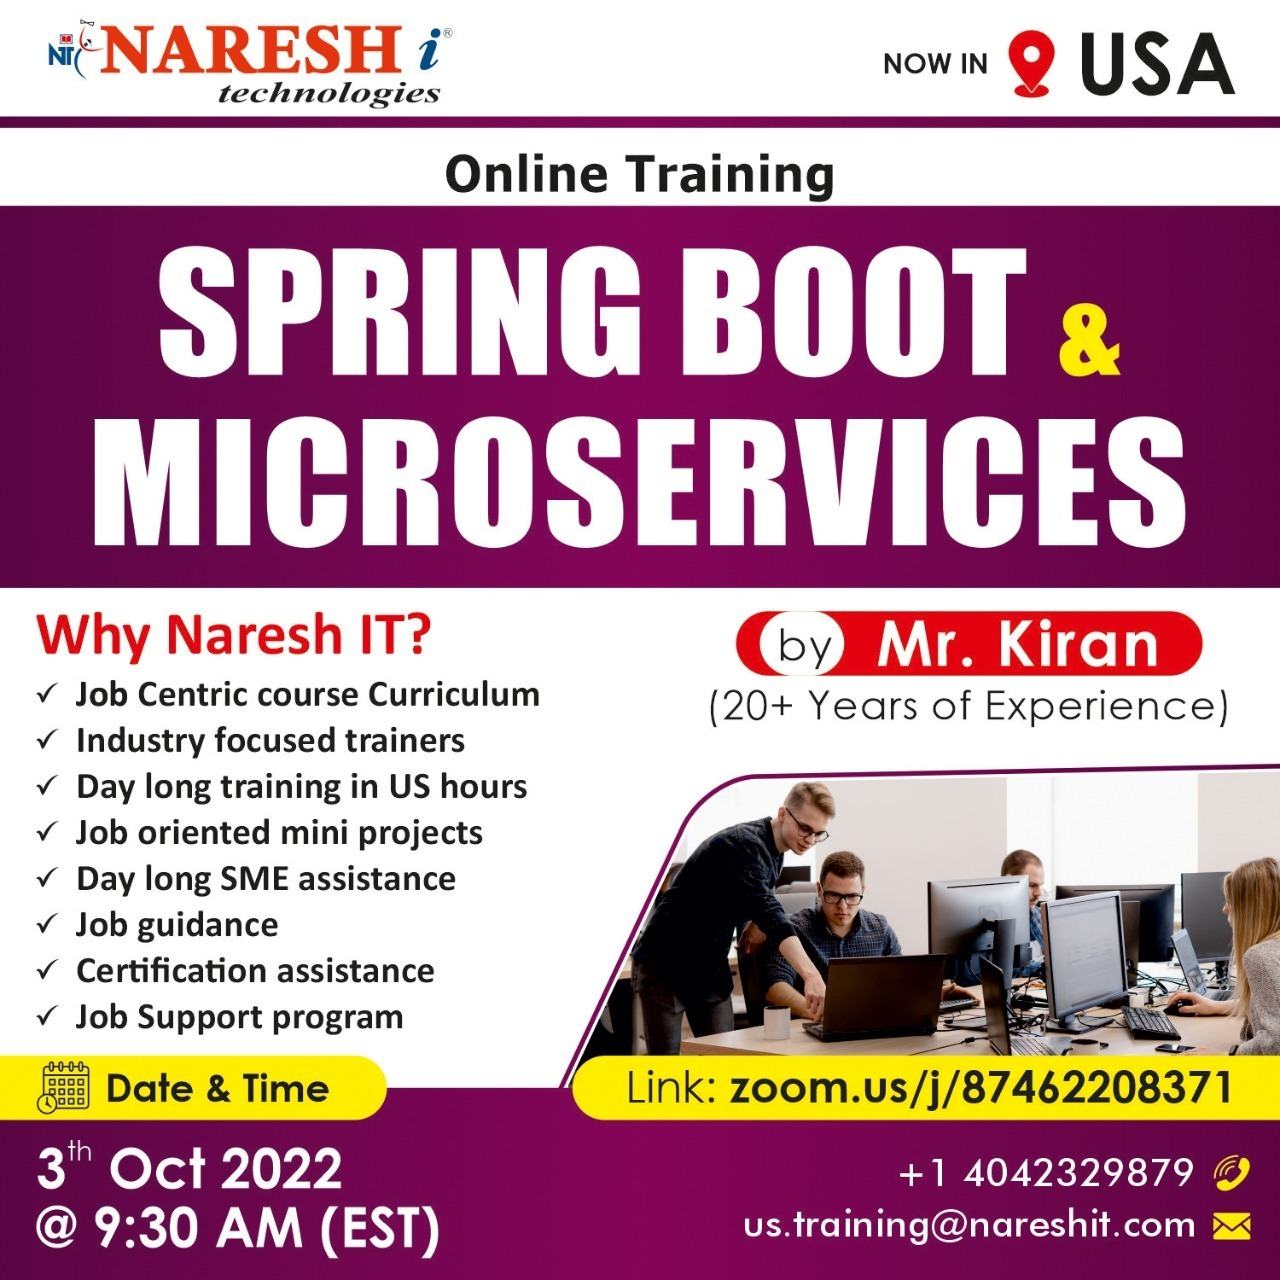 Springboot & Microservices Online Training Classes in the USA, Online Event